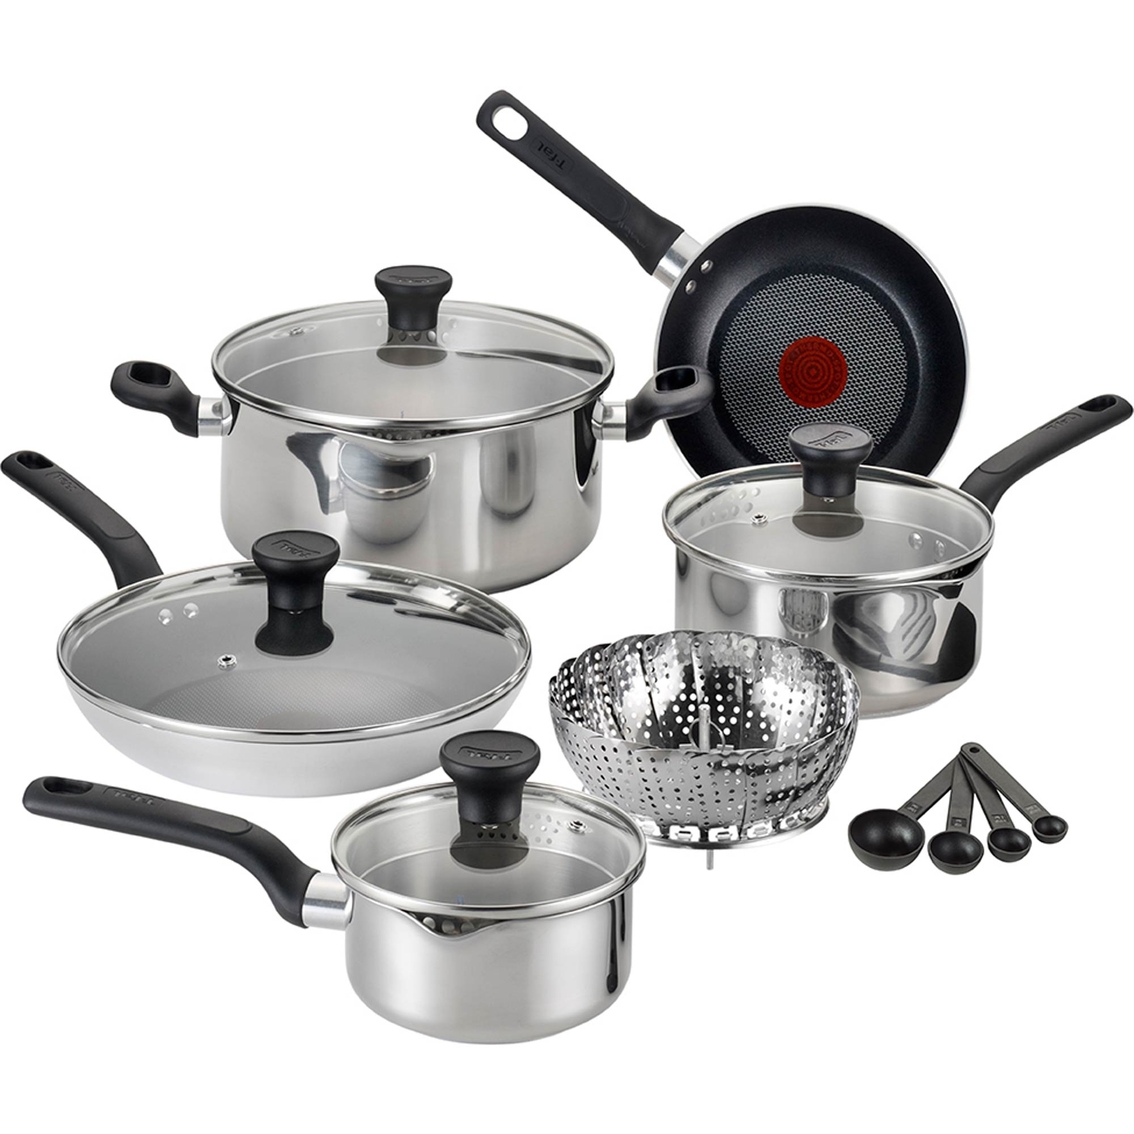 T-fal Excite Stainless Steel 14 Pc. Cookware Set, Stainless Steel, Household